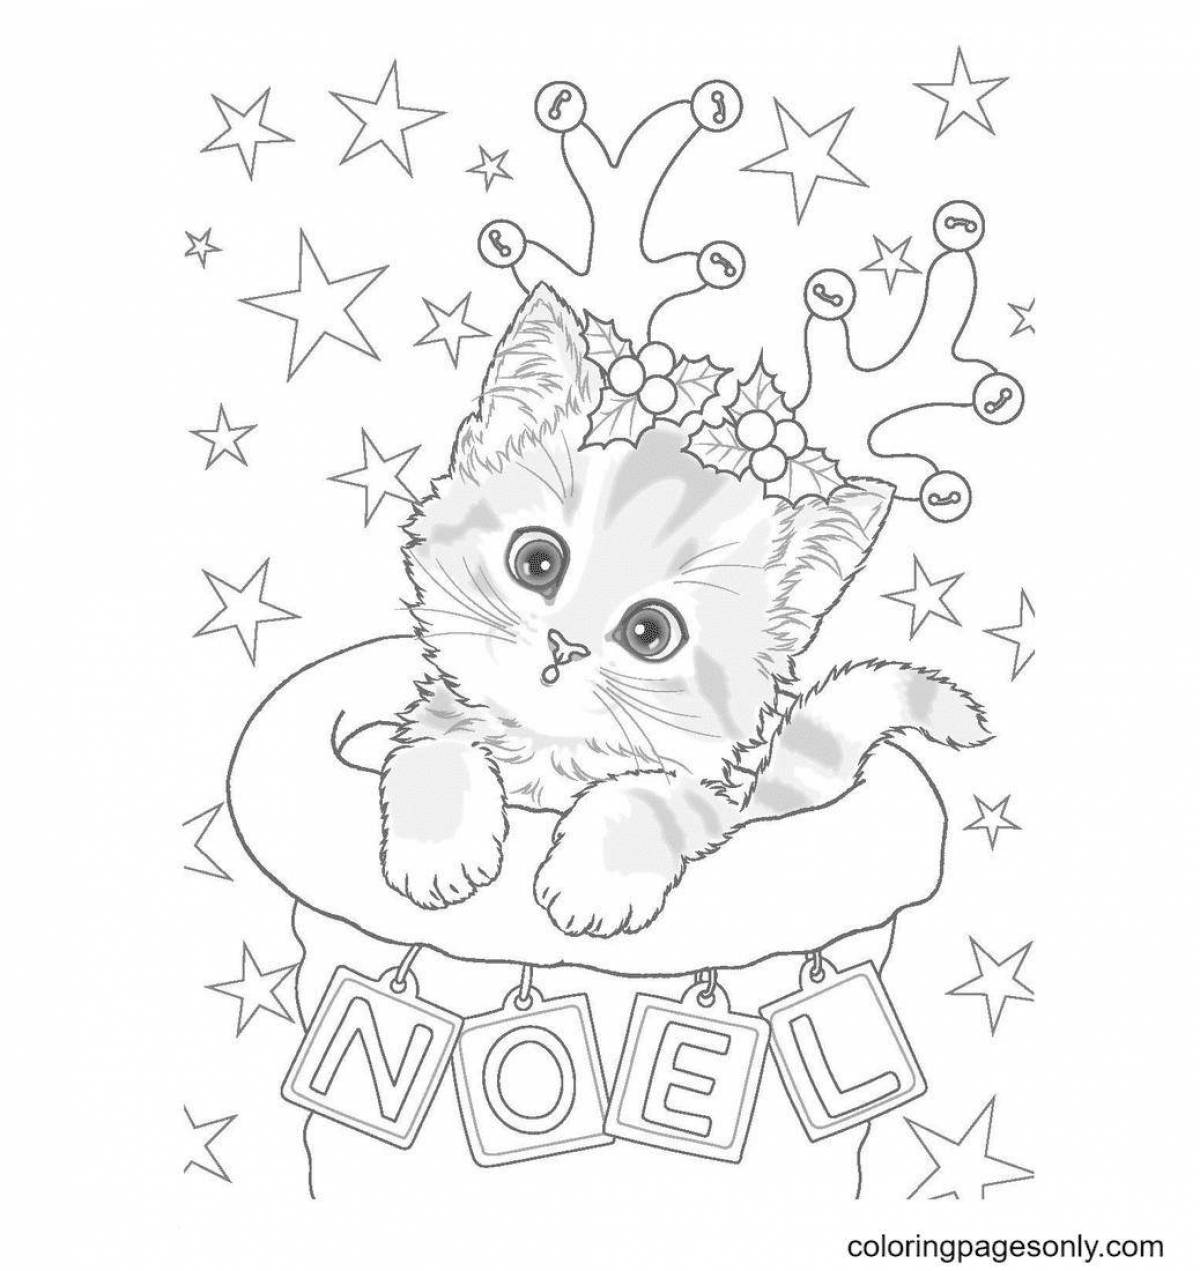 Awesome cute christmas coloring book